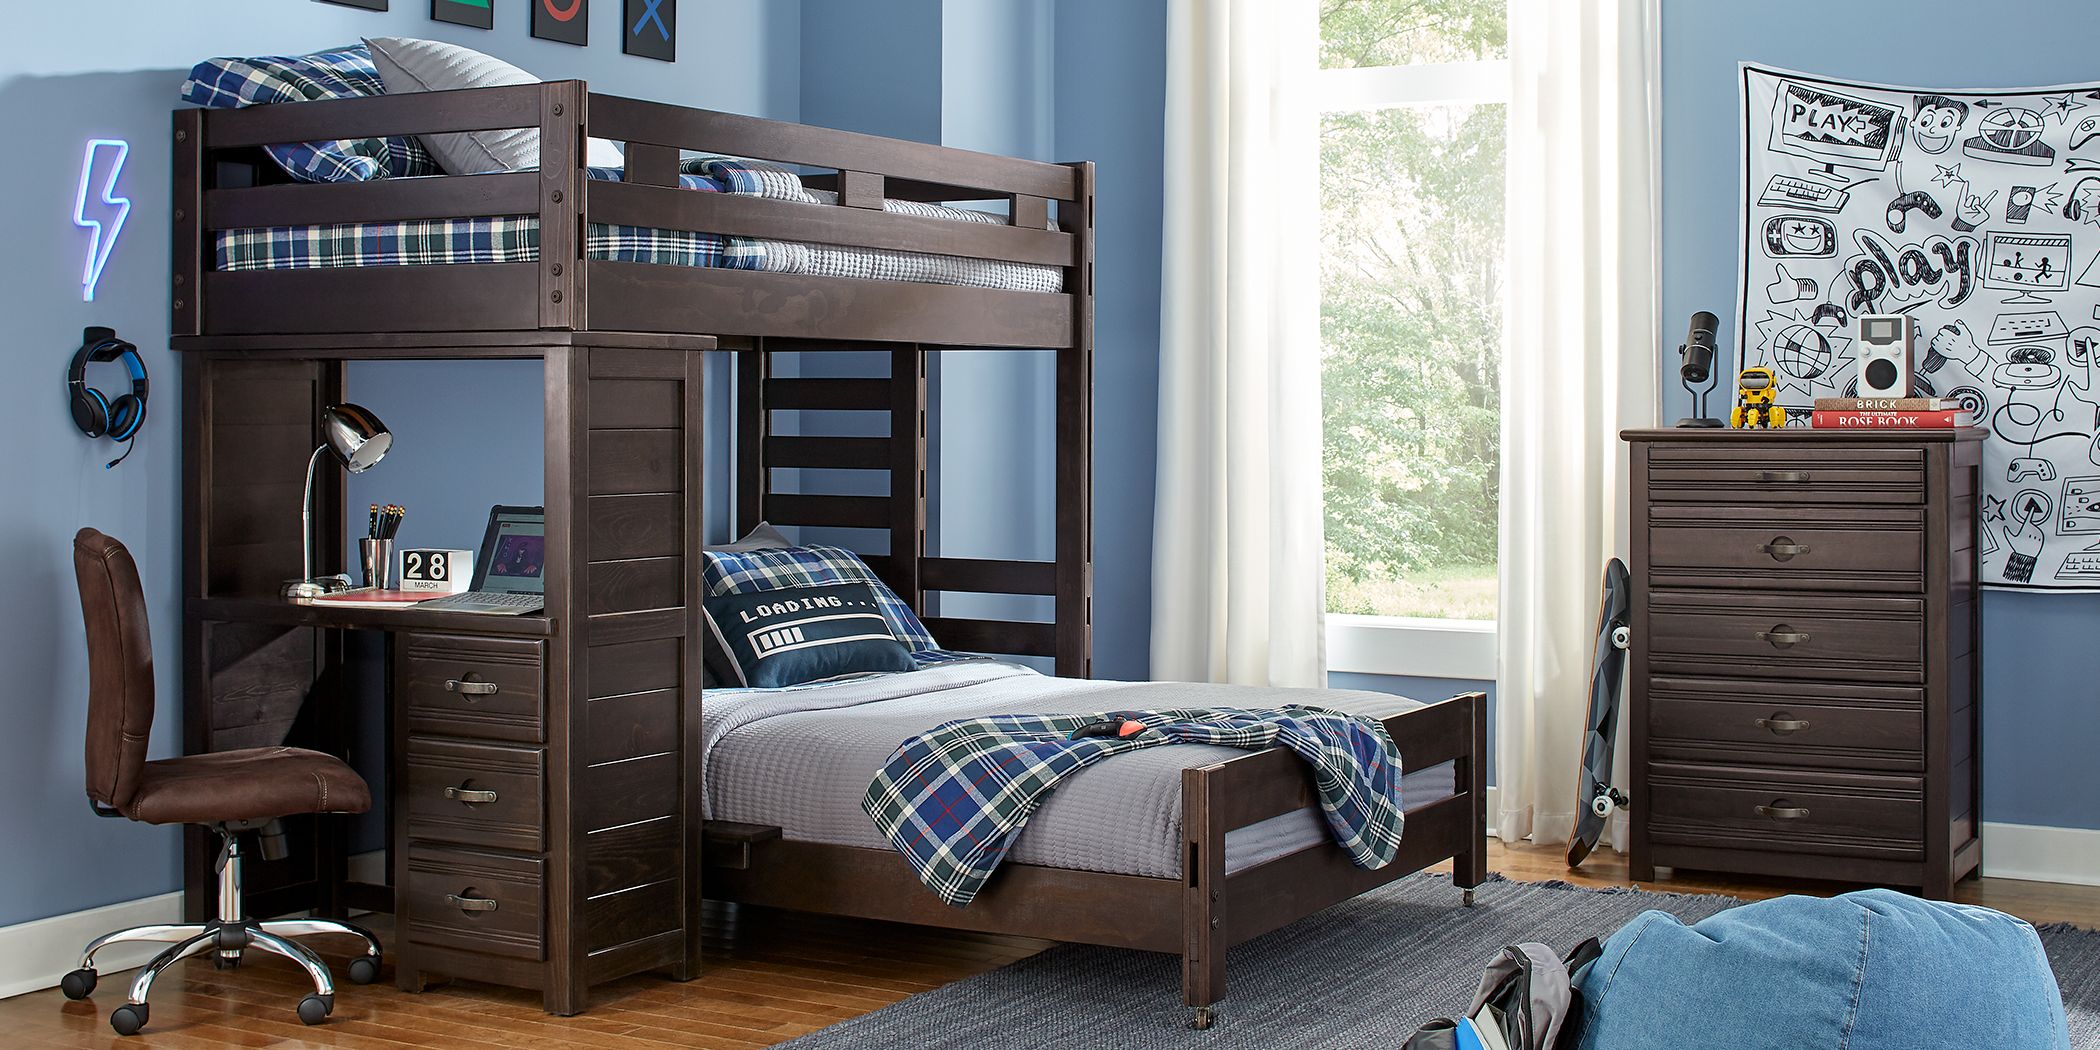 bunk beds on sale for black friday